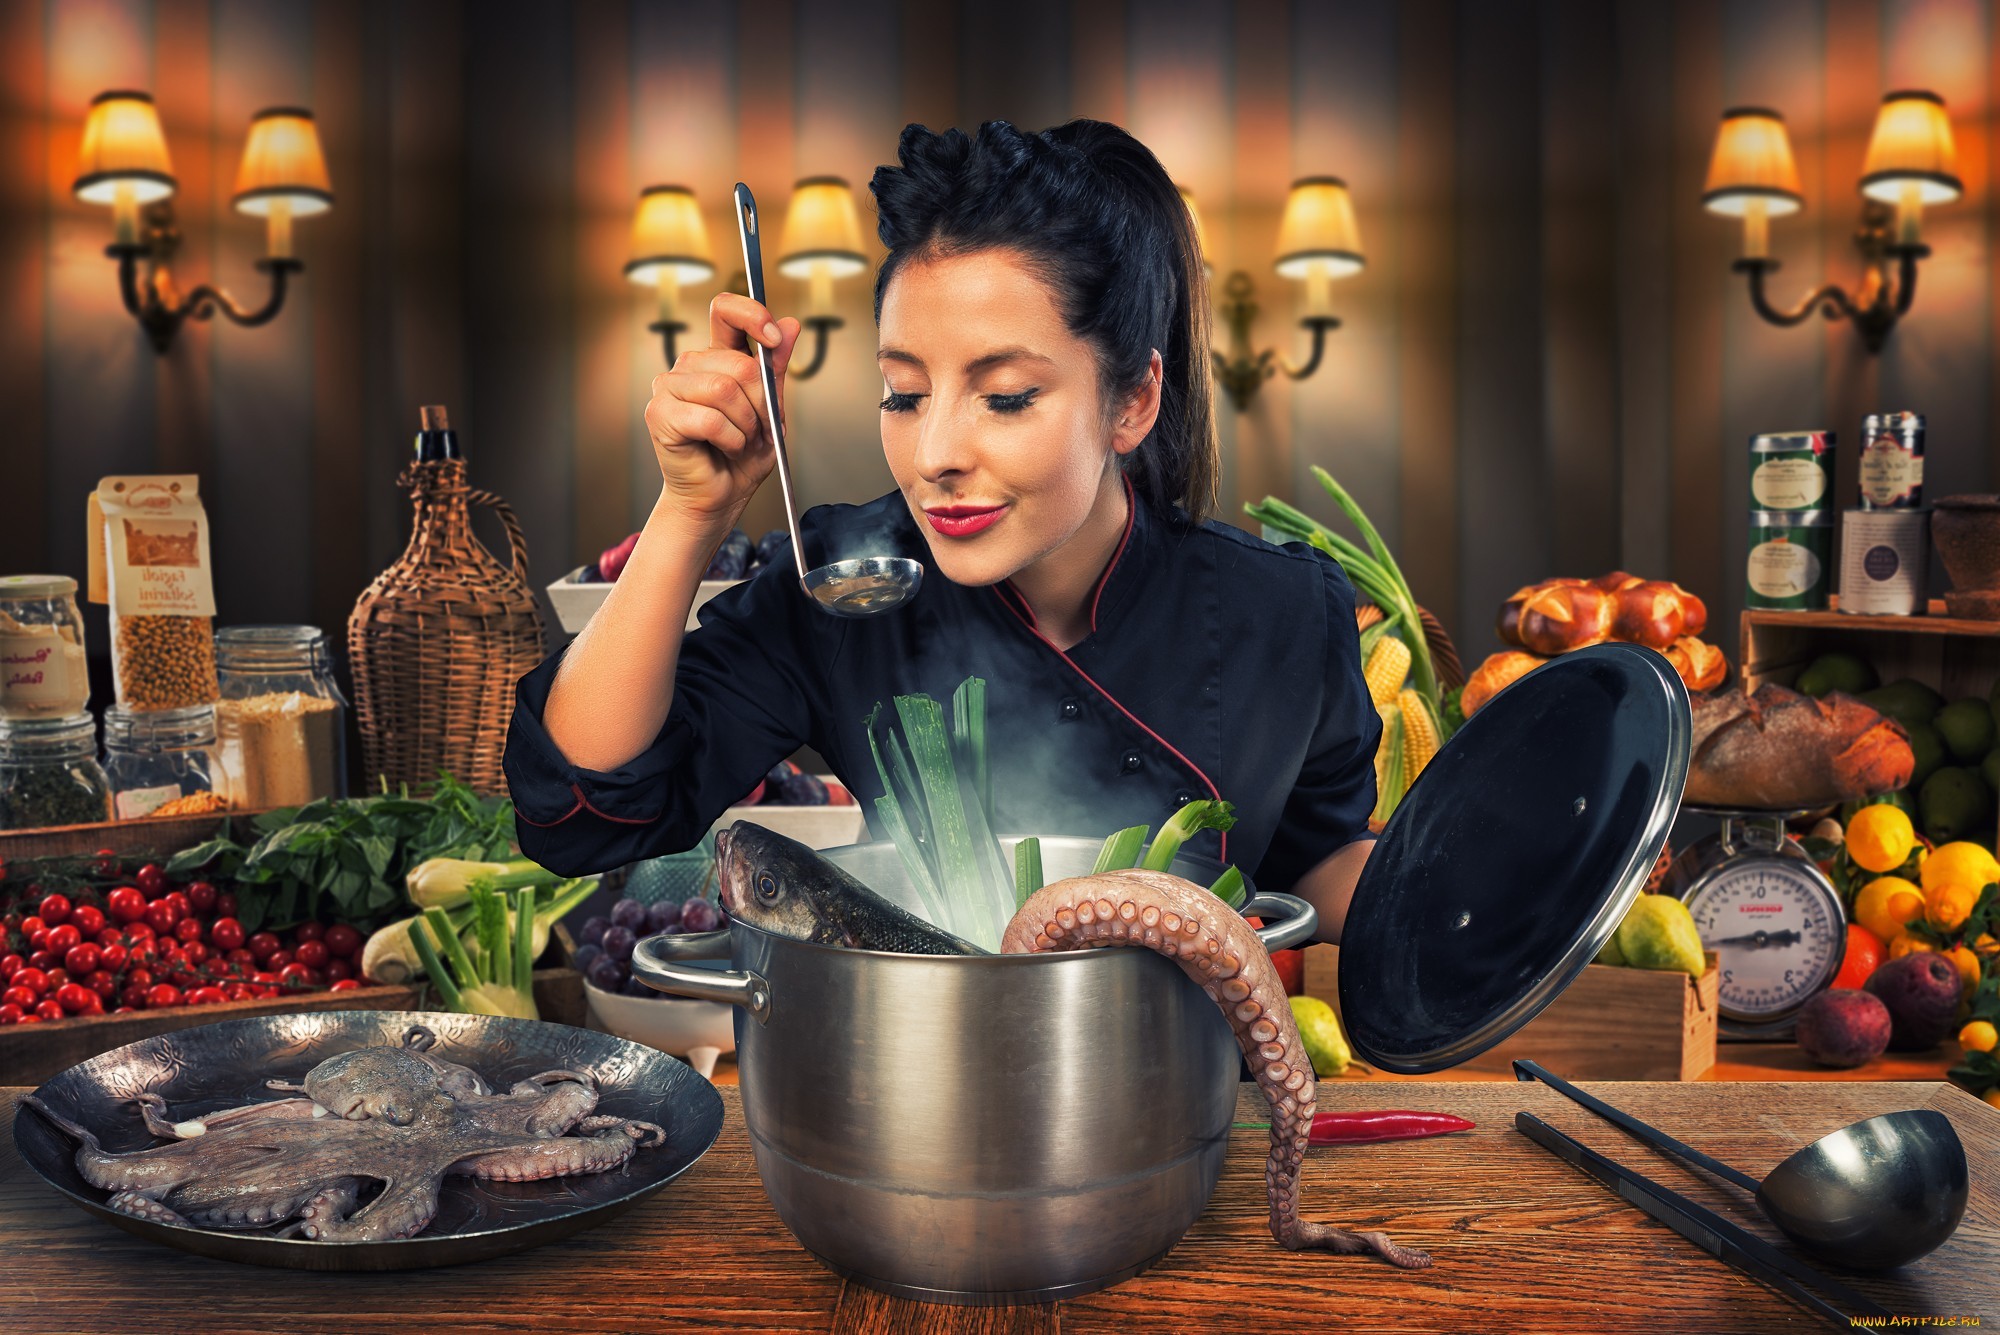 People 2000x1335 women kitchen cooking octopus women indoors food black hair red lipstick seafood tomatoes vegetables